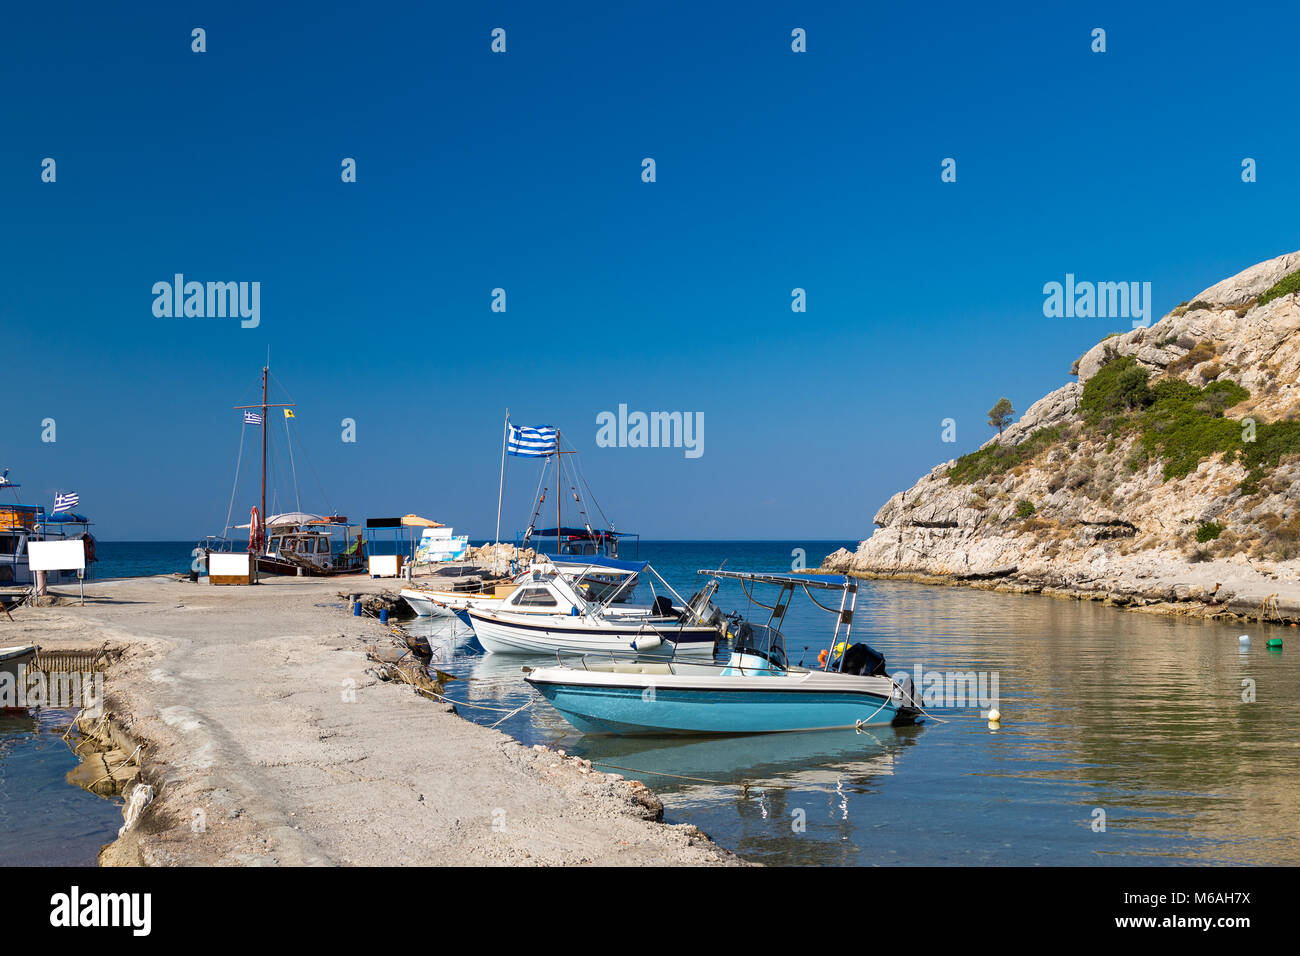 Small harbor in the bay of Kolymbia, Rhodes Stock Photo